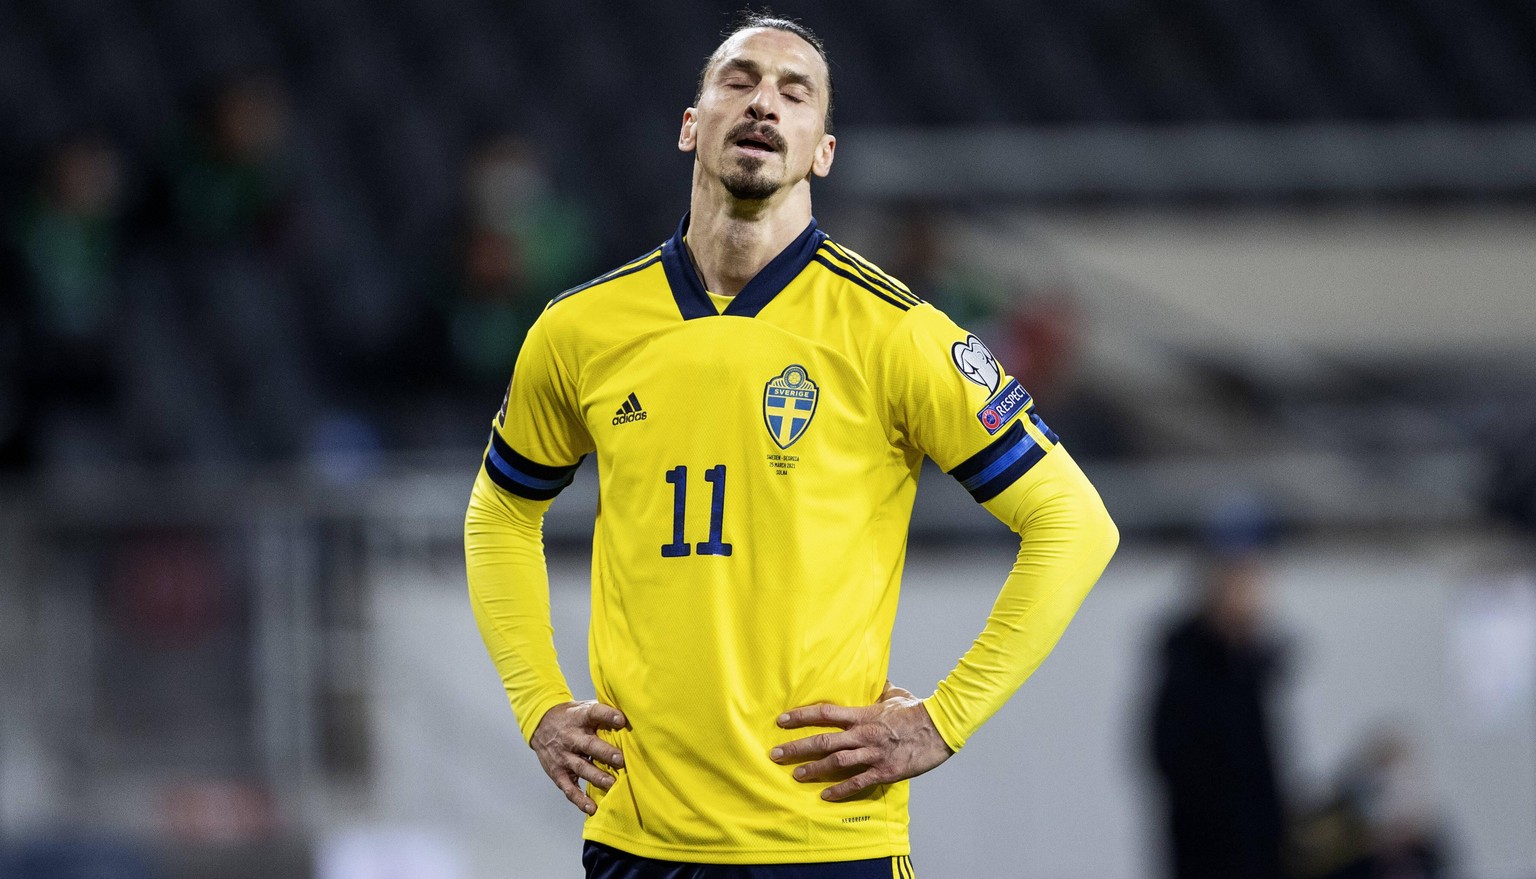 Zlatan Ibrahimovic during the World Cup qualifier group A football match between Sweden and Georgia at Friends Arena Thursday March 25, 2021. 2021-03-25 c NILSSON NILS PETTER / Aftonbladet / TT * * *  ...